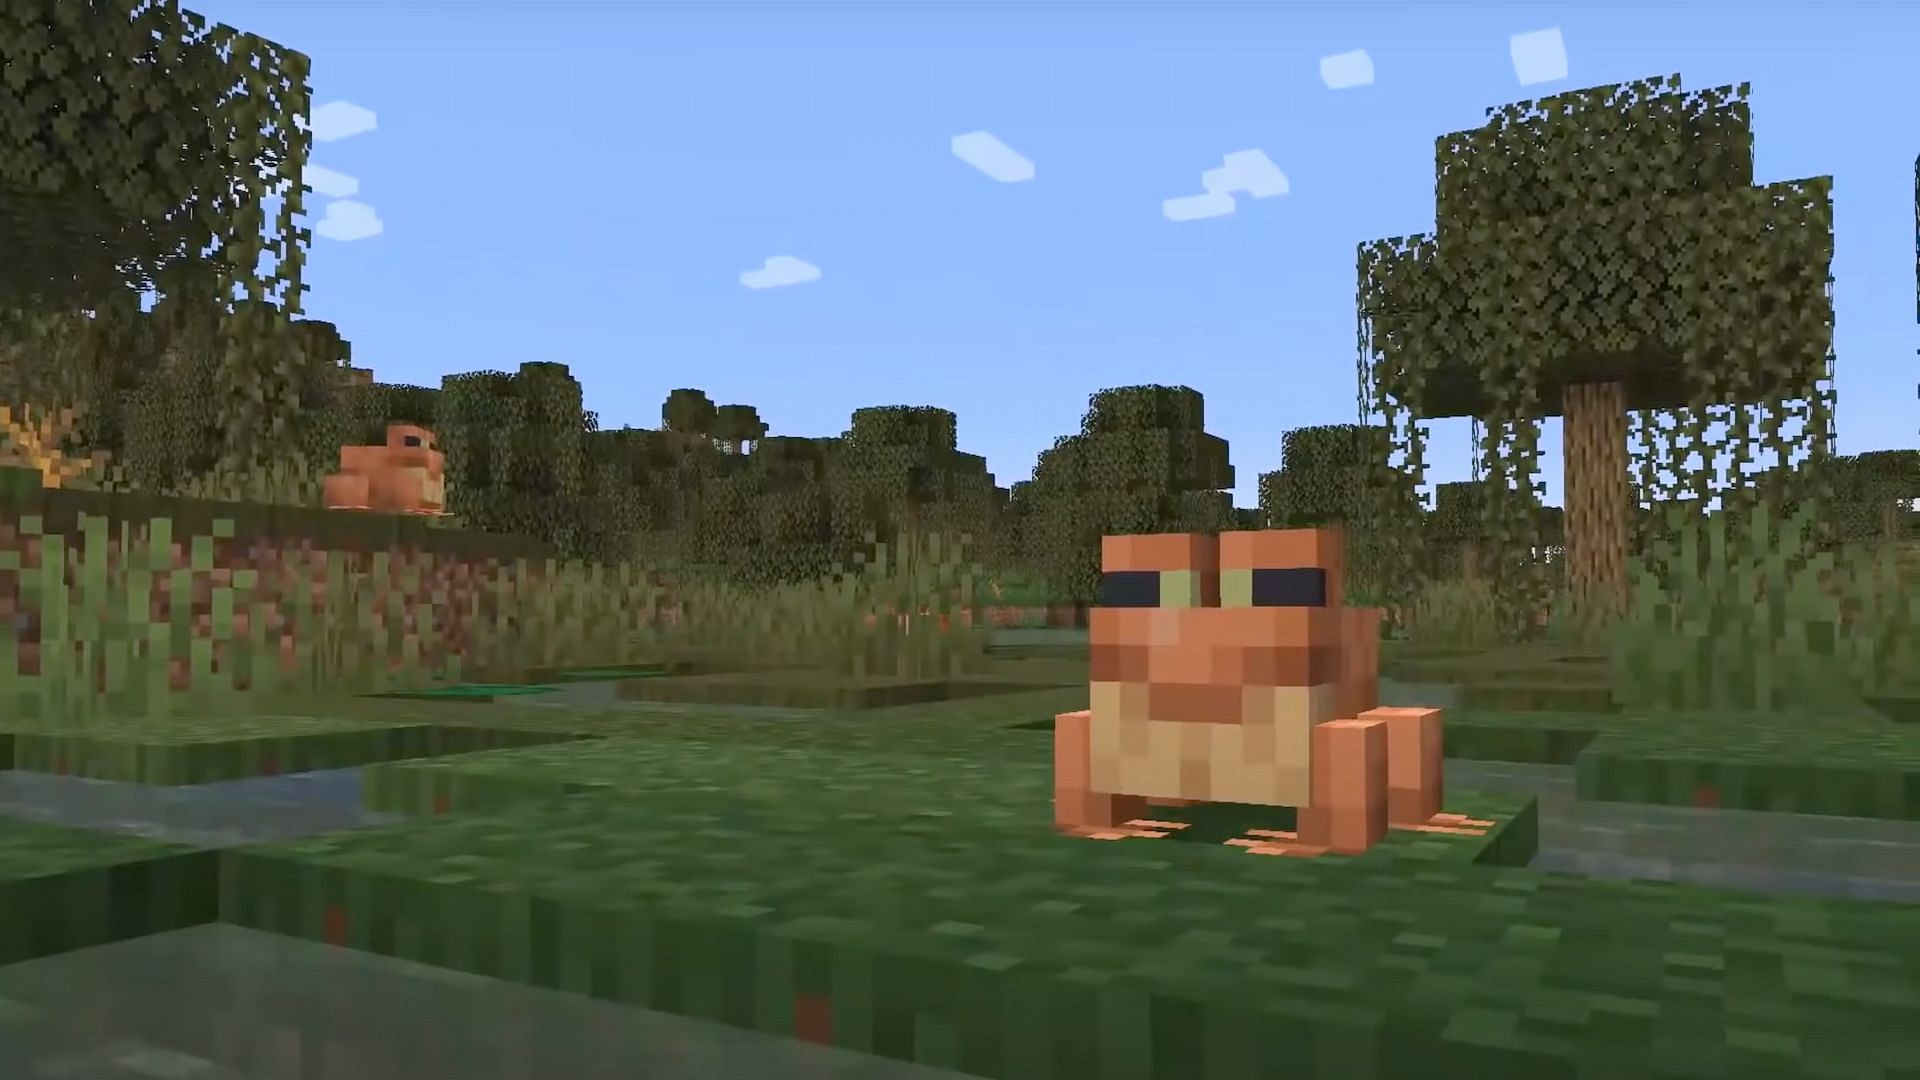 Players are looking forward to all of the fantastic changes to blocks, biomes, and mobs in the upcoming 1.19 update (Image via xisumavoid/YouTube)